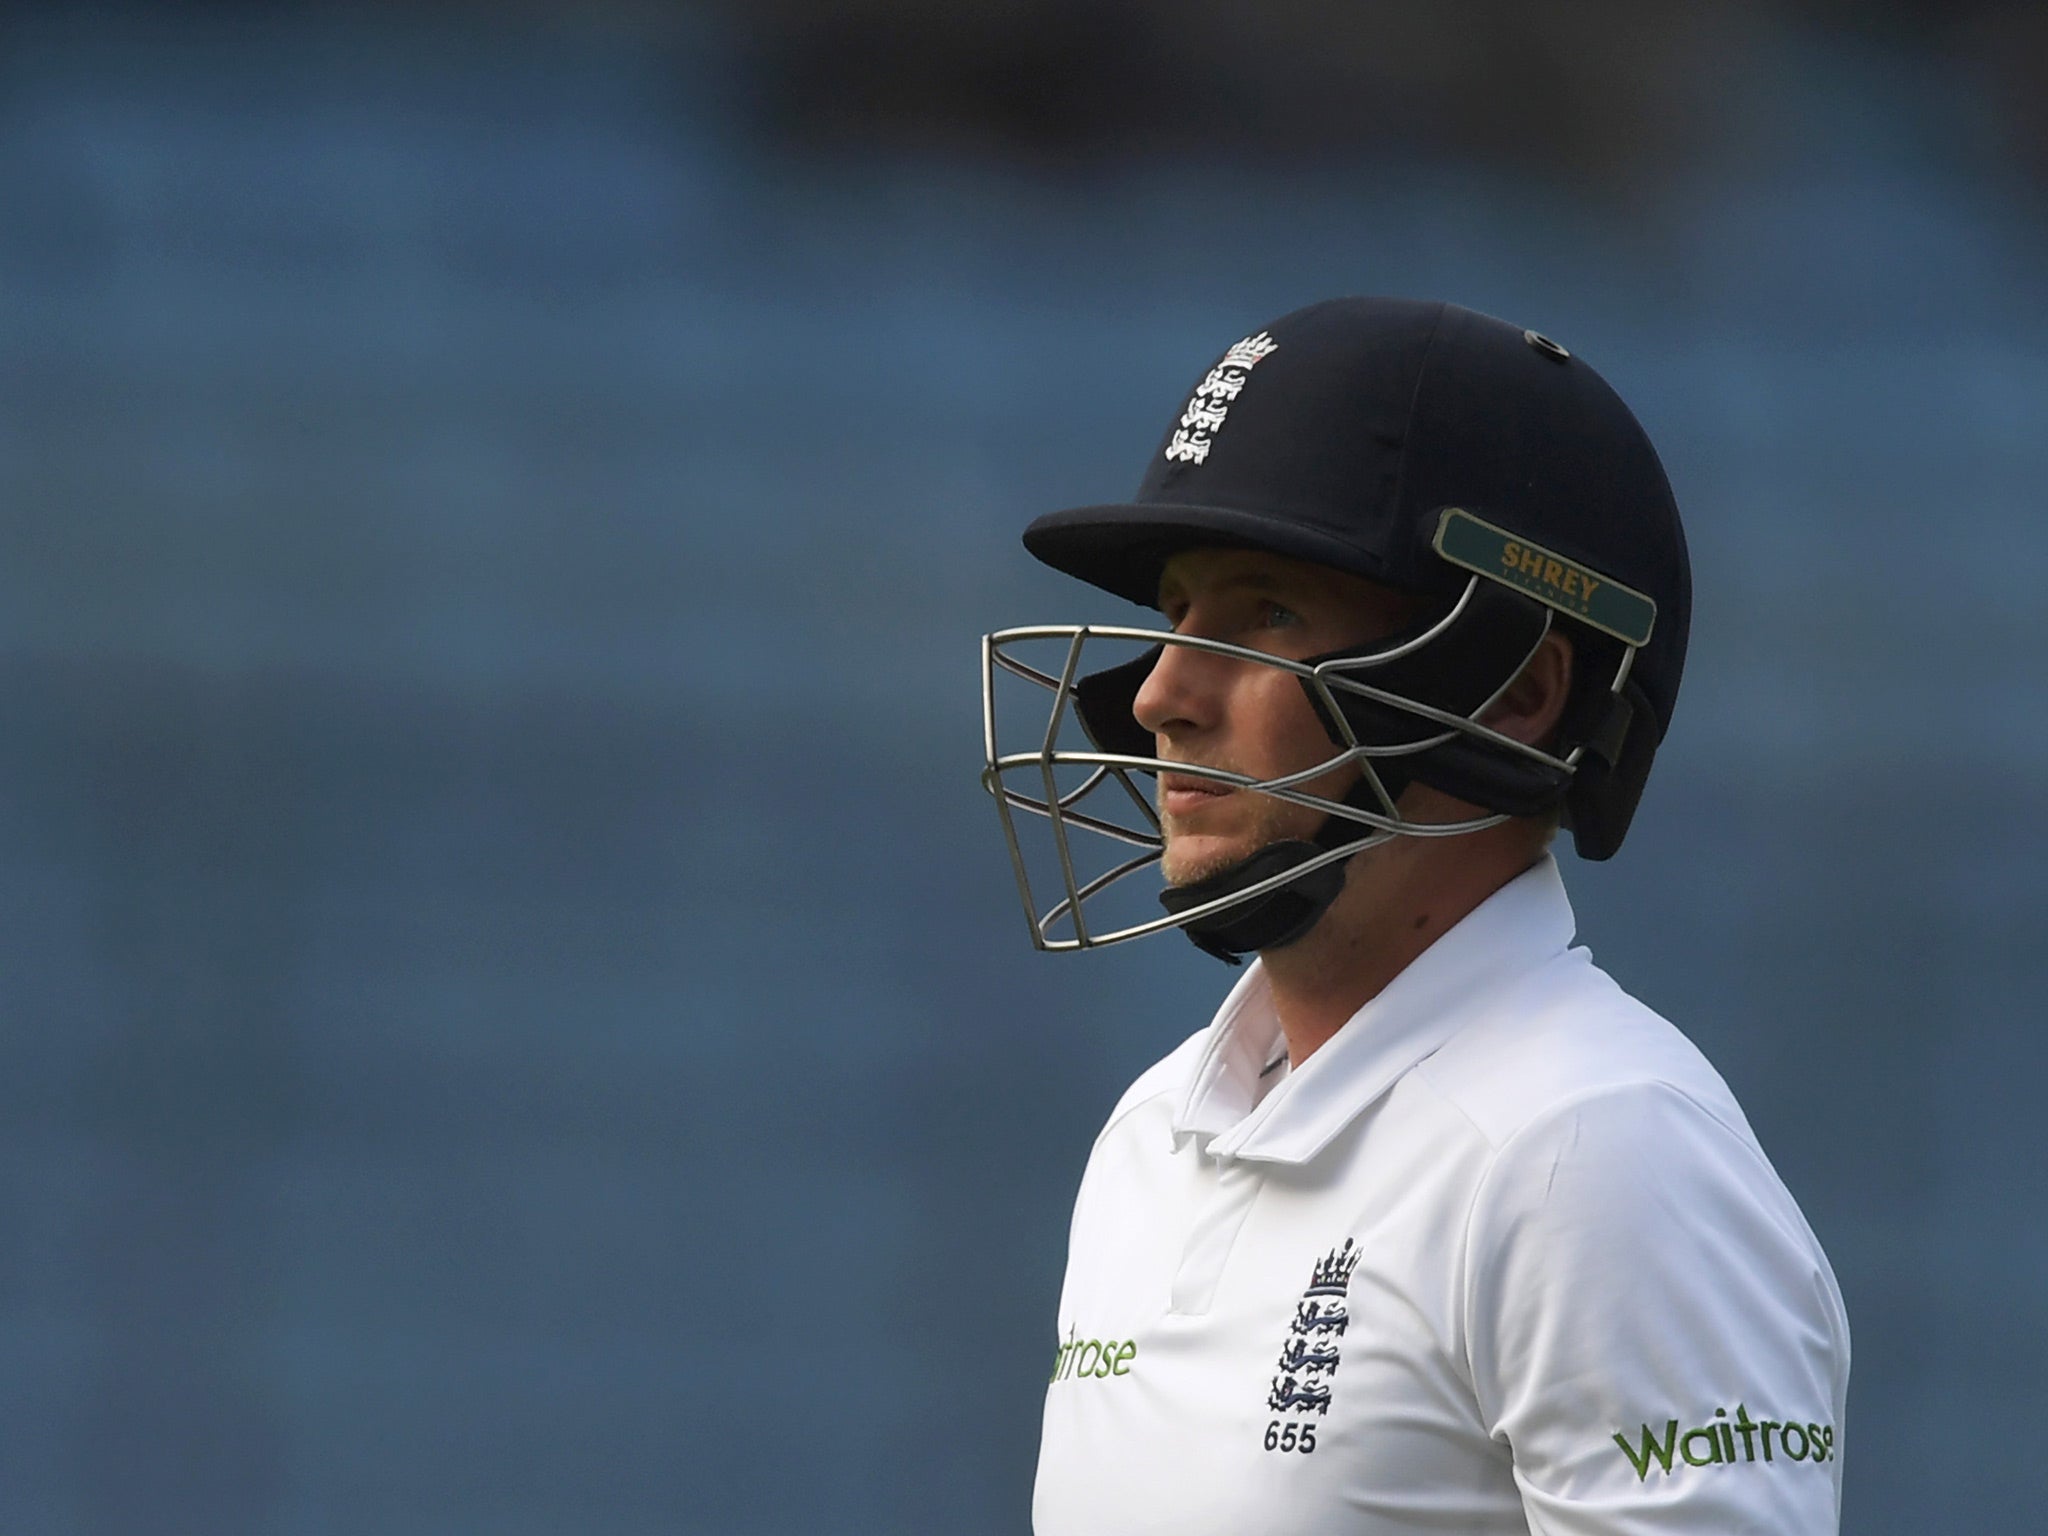 Root is already vice-captain of the Test side